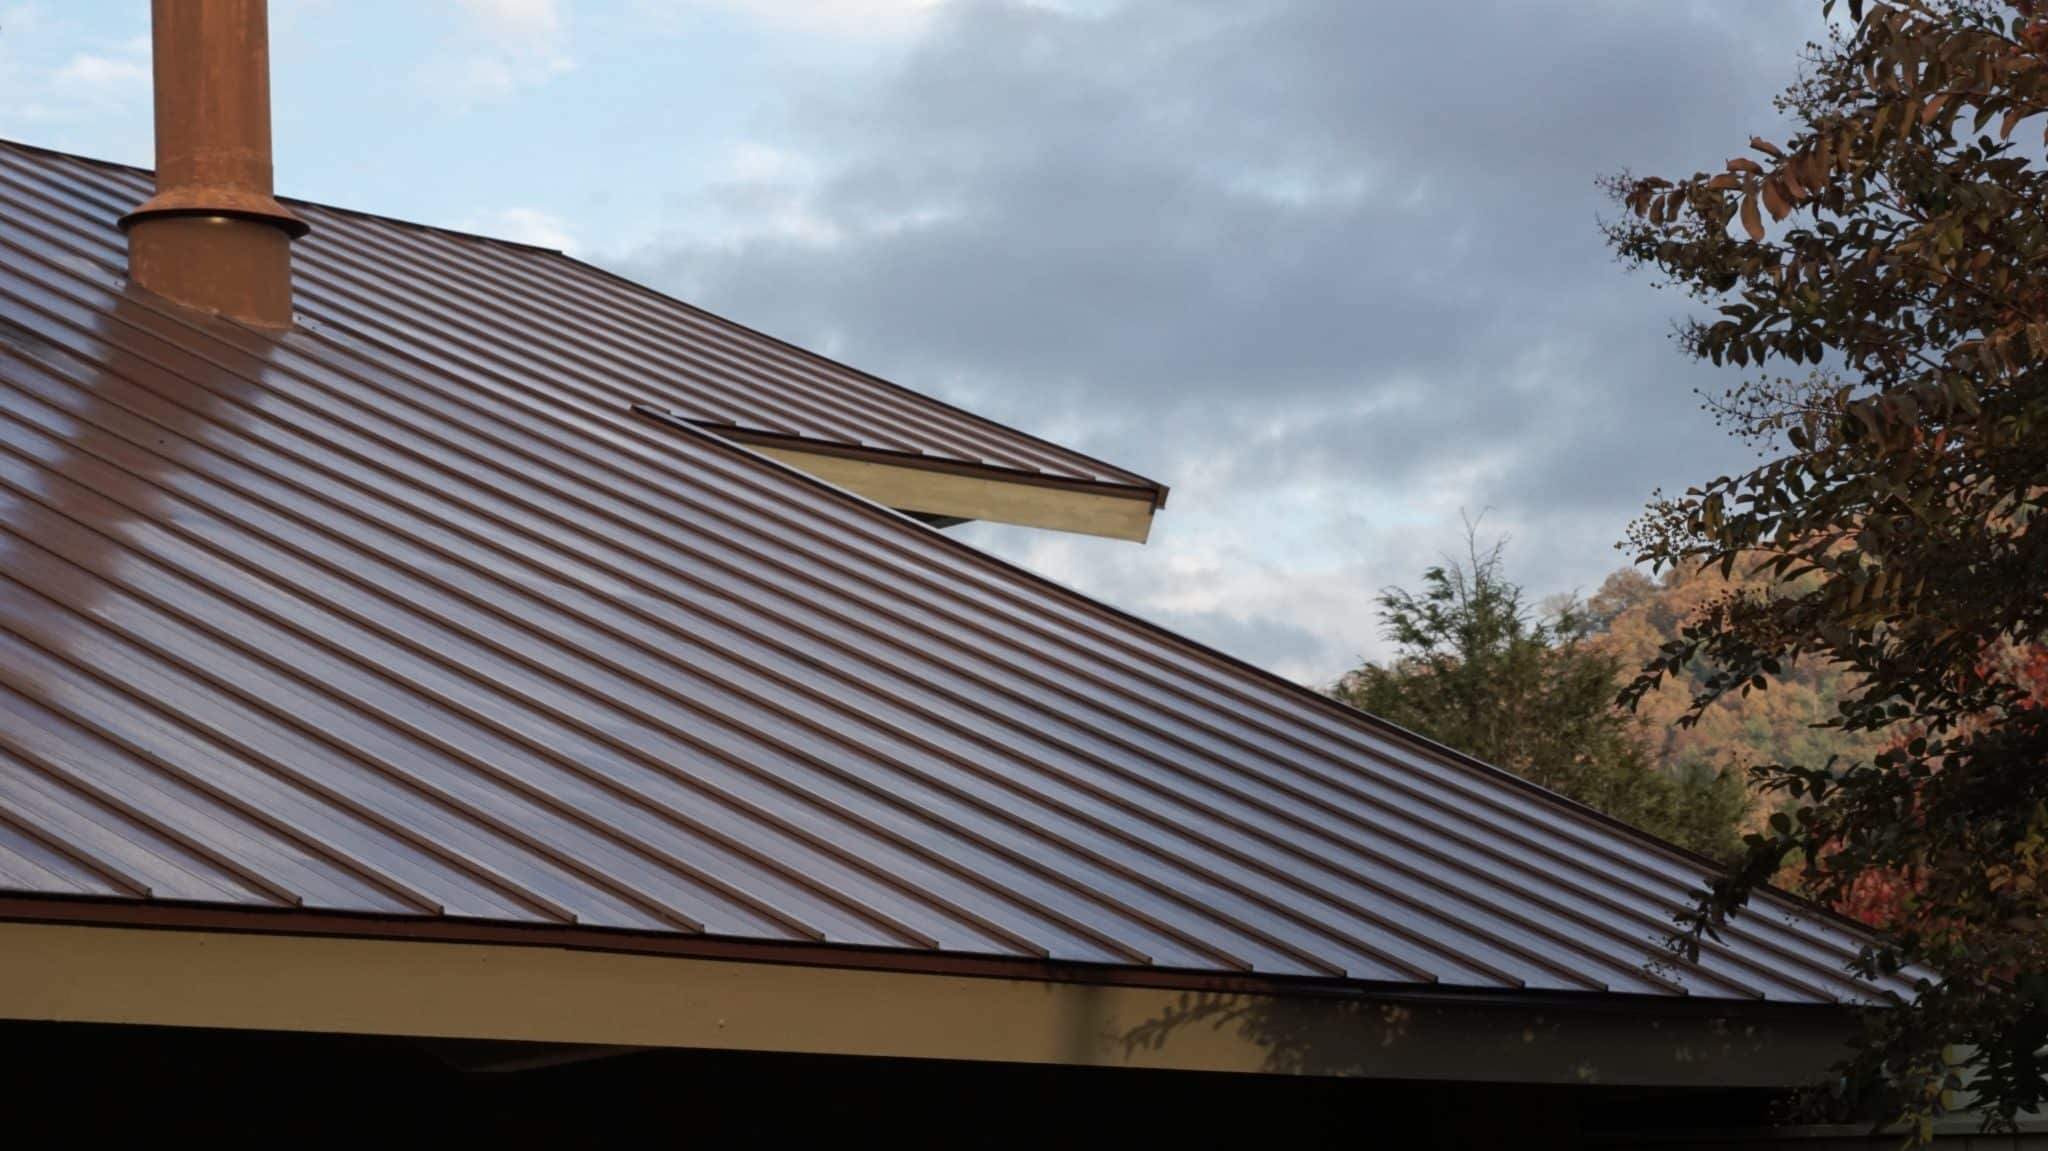 A brown metal roof on a residential home